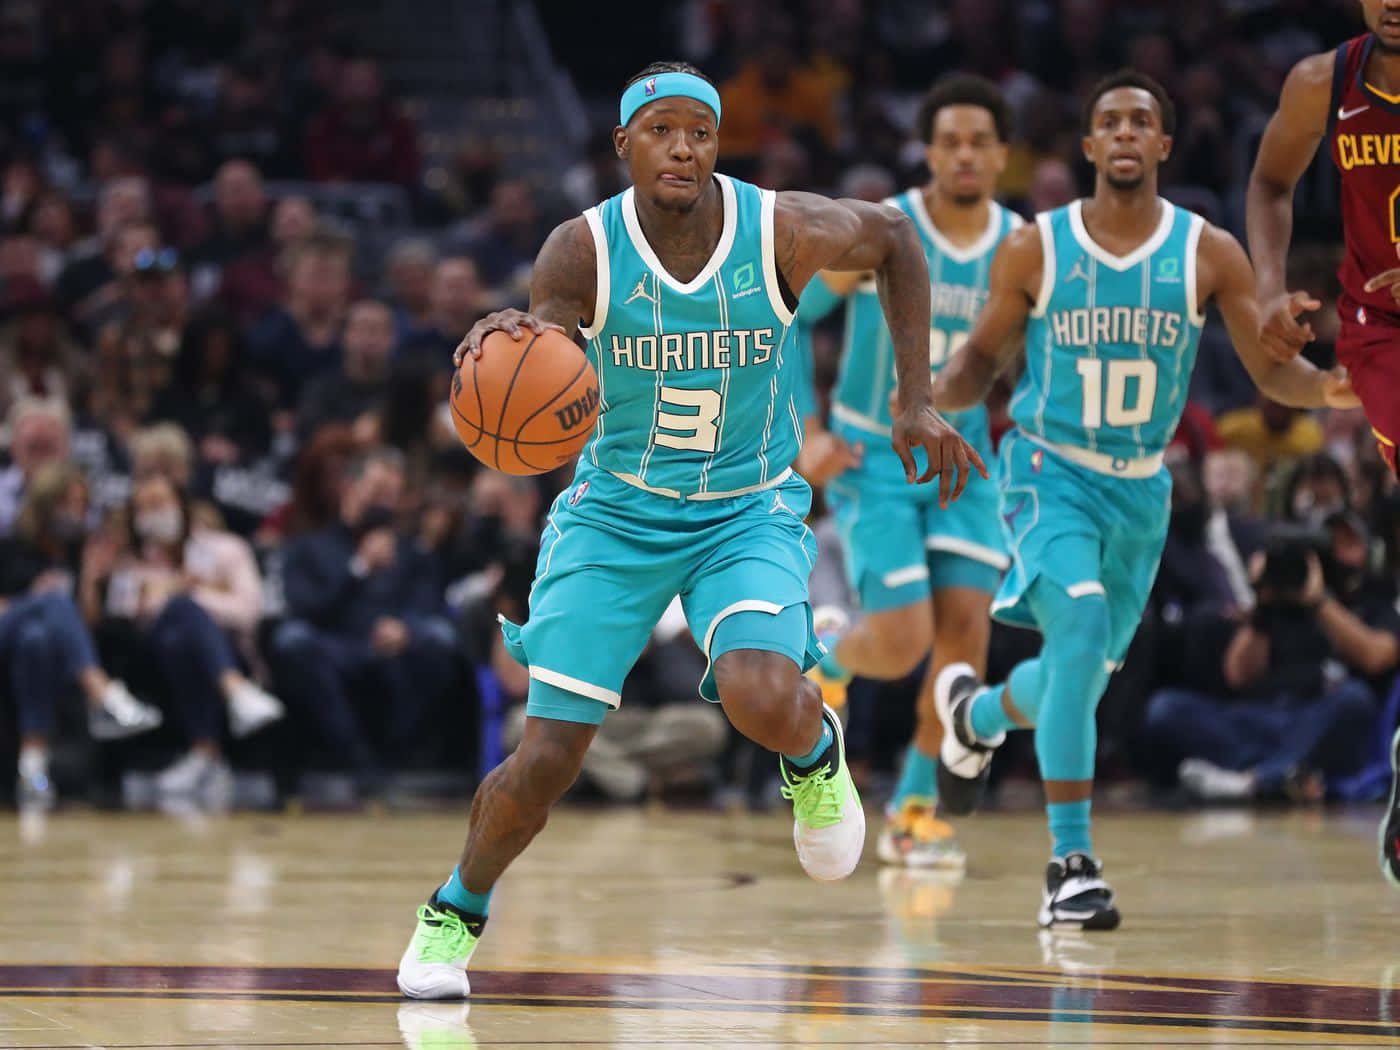 Terryrozier Charlotte Hornets Nba Would Be Translated To Italian As: Terry Rozier Charlotte Hornets Nba. Since It Is A Name And A Team, We Would Retain The Same Words In Italian As Well. Sfondo